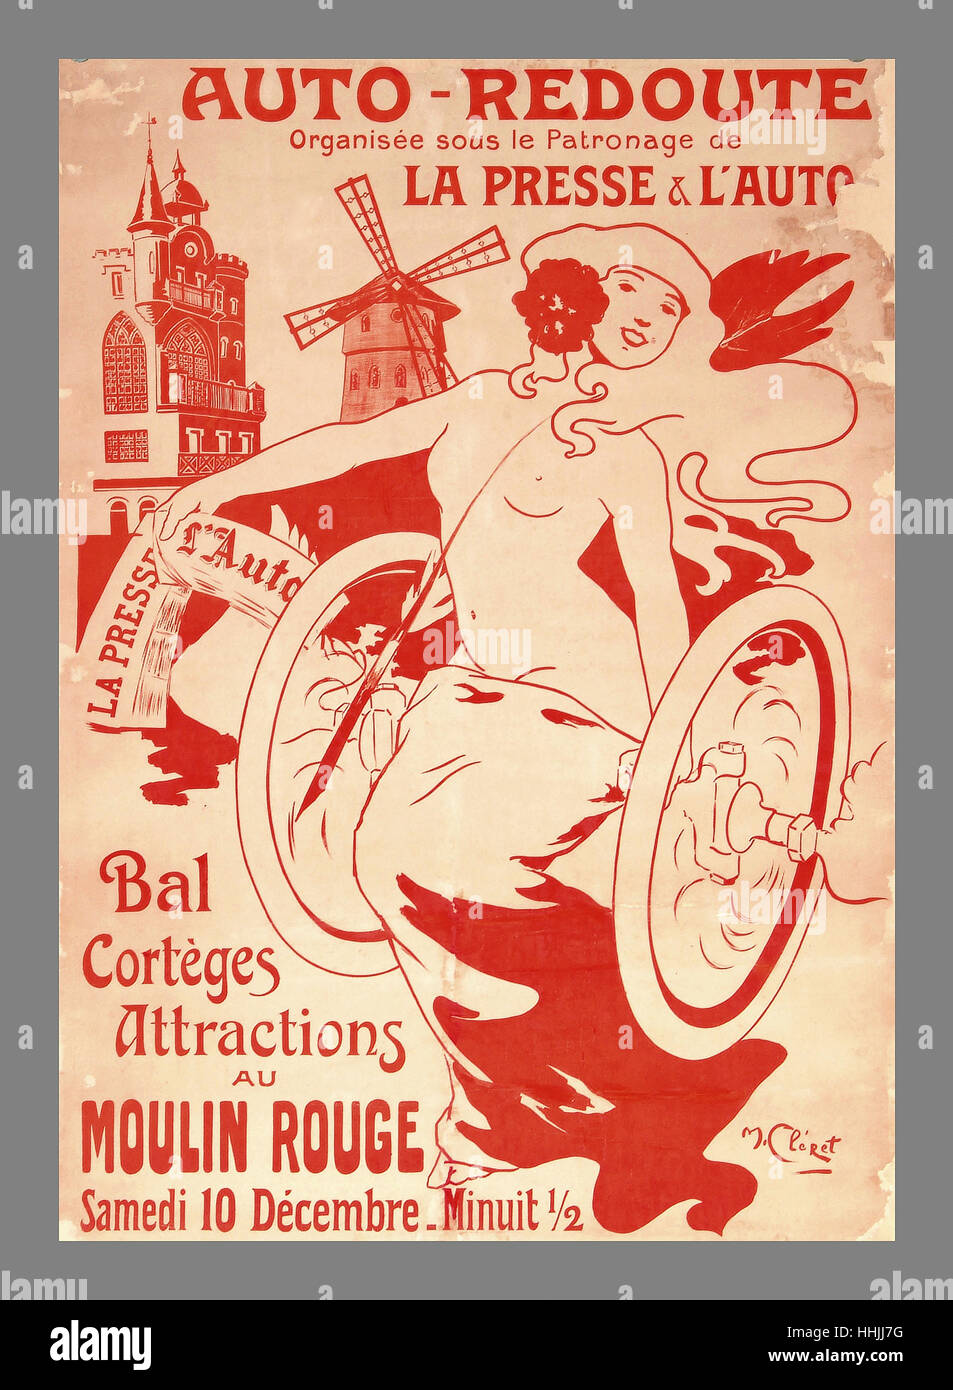 Vintage retro Car Parade Dancers and Attractions Moulin Rouge Poster Paris France Stock Photo